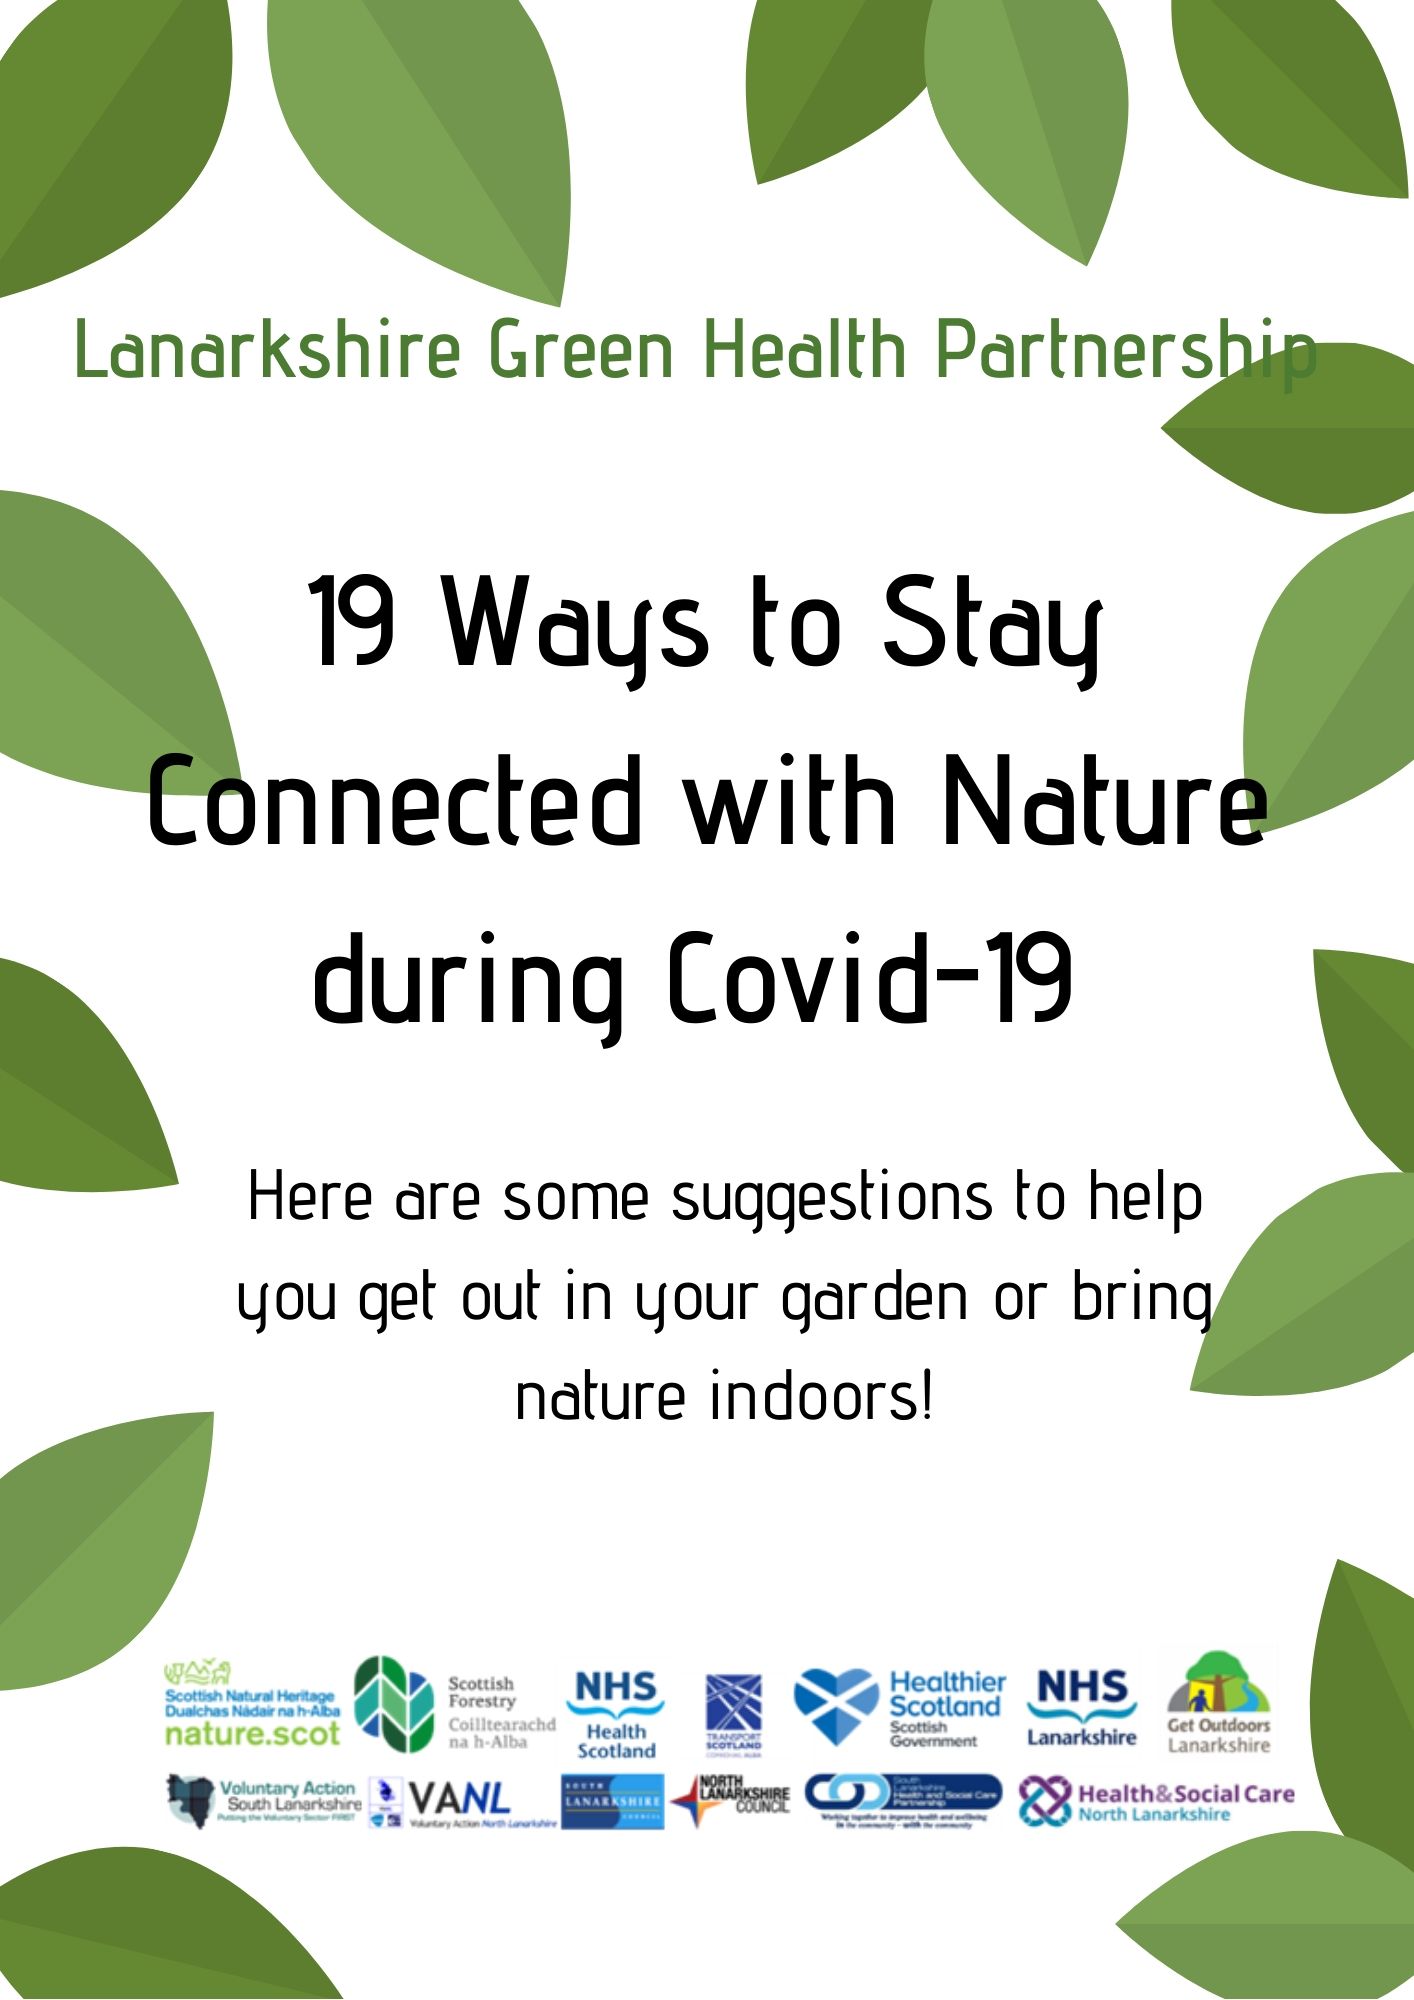 19 Ways to Stay Connected with Nature